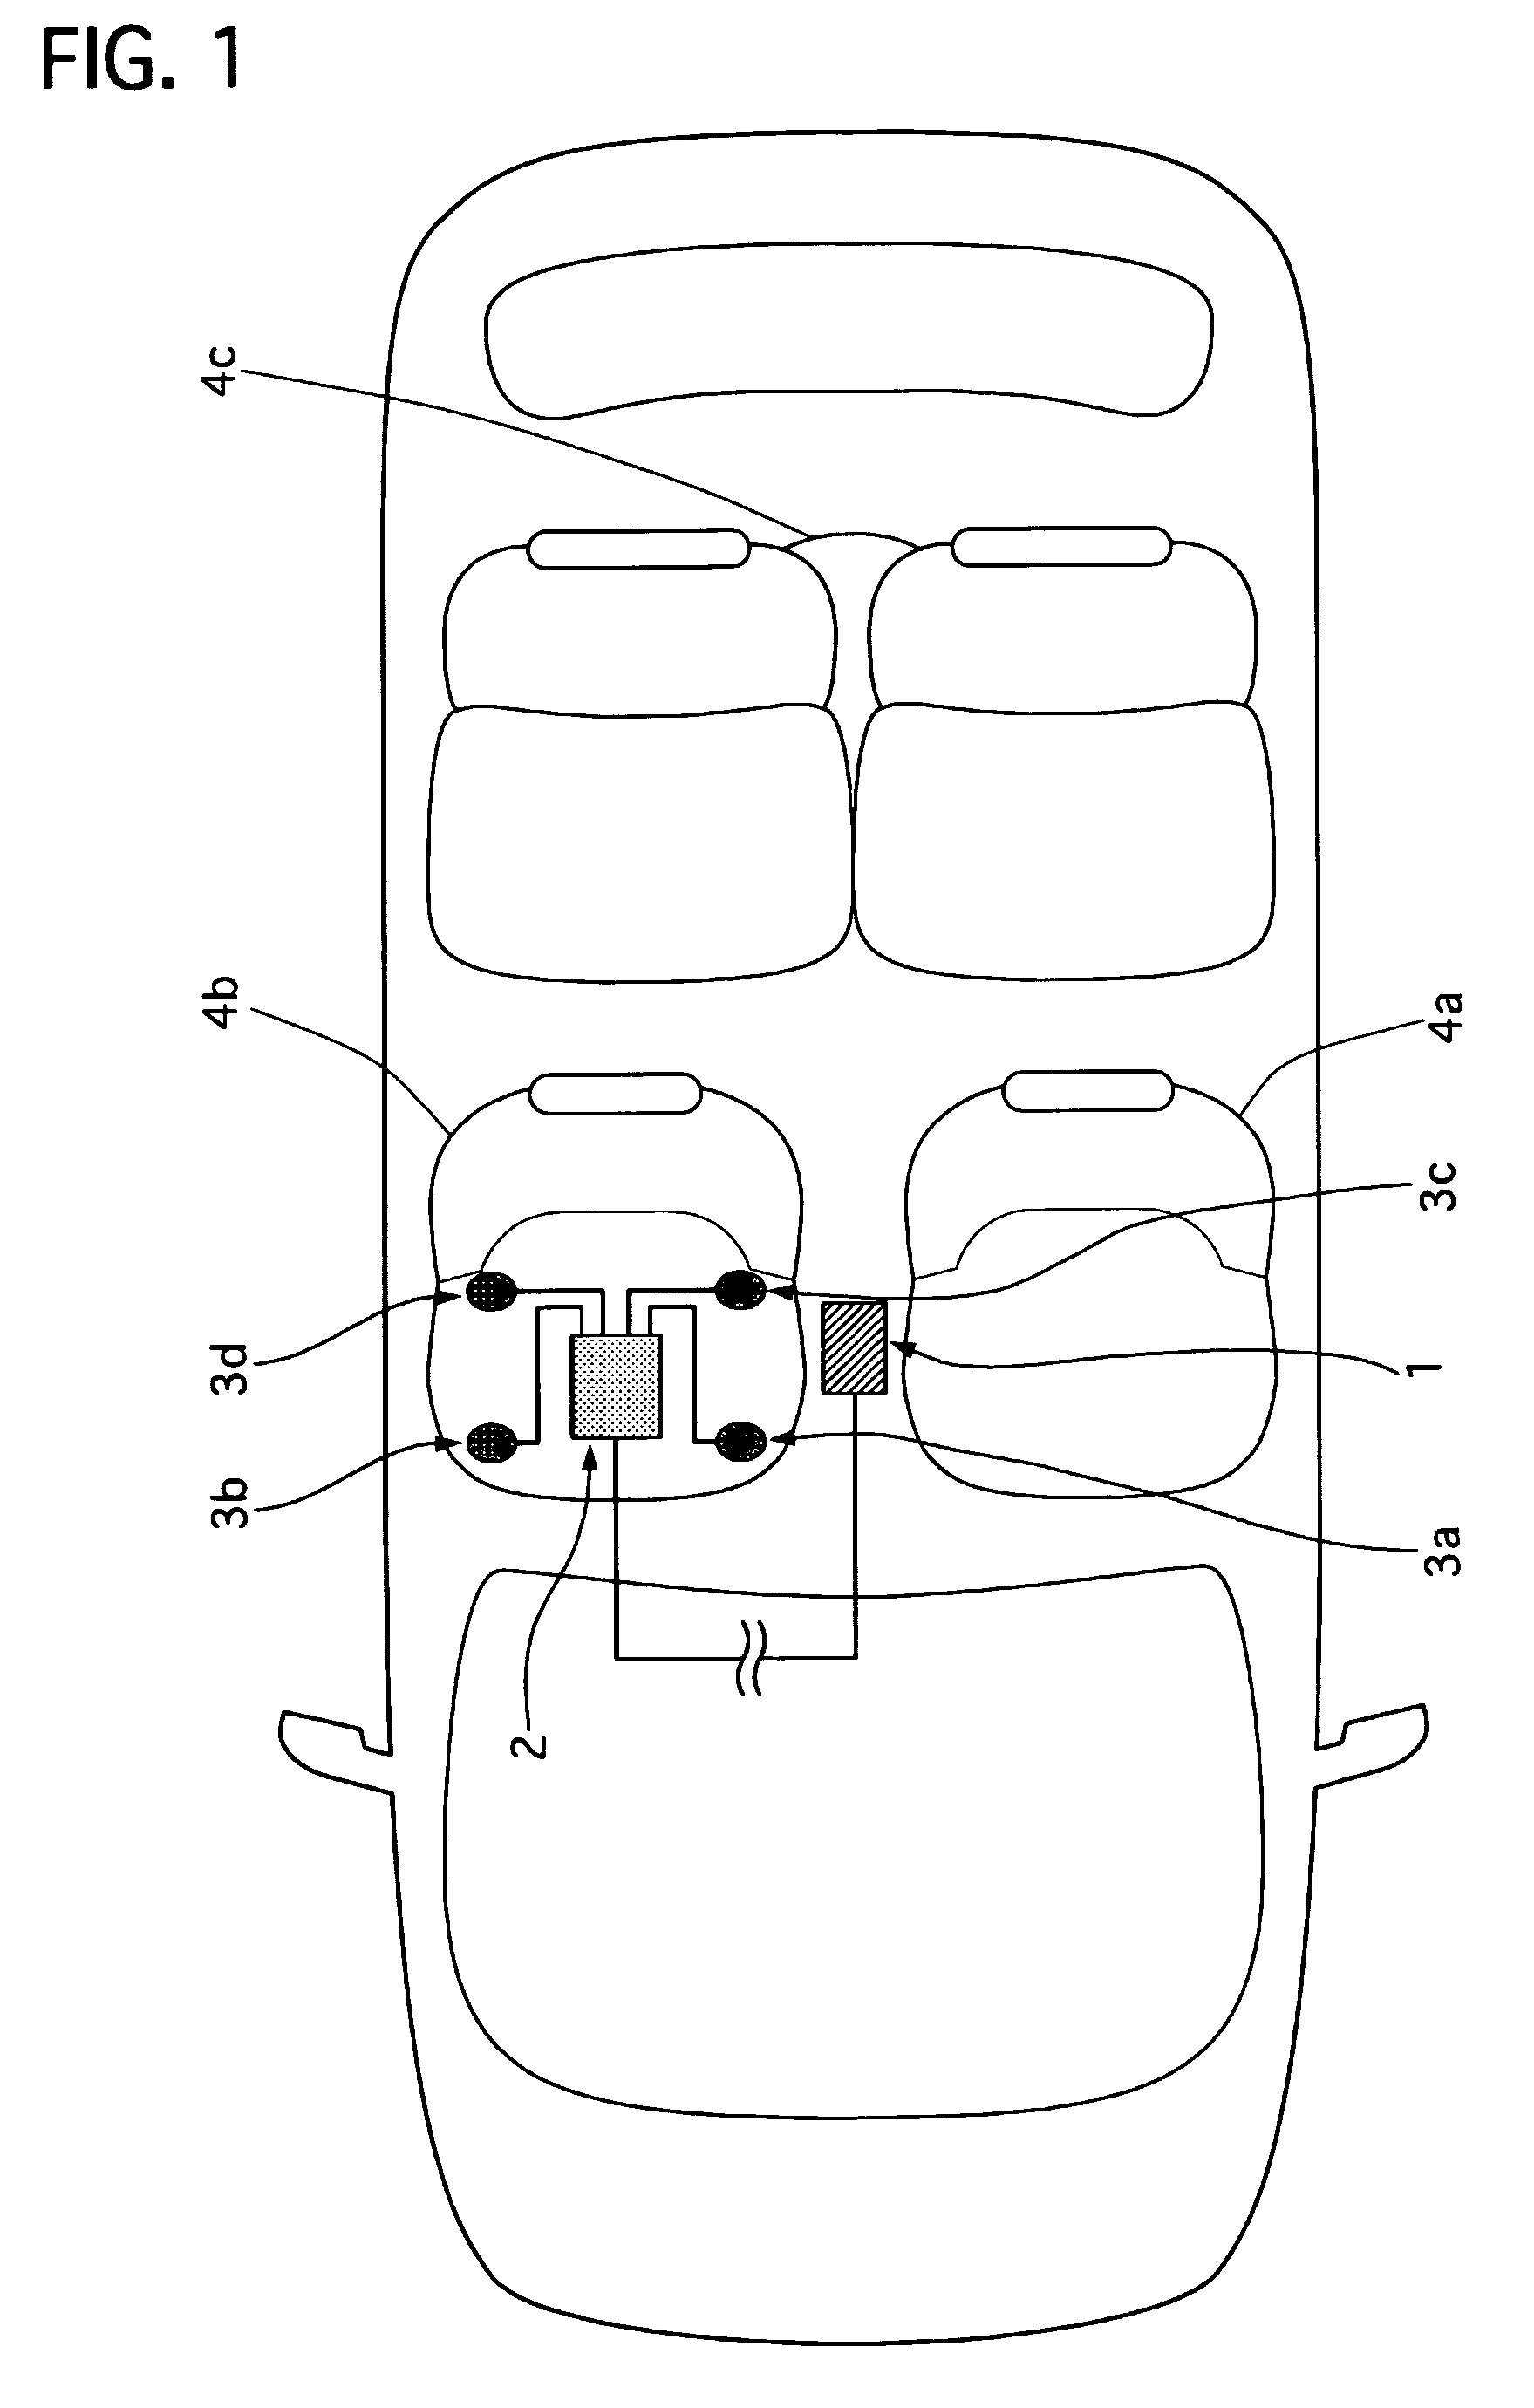 Passenger detecting device adapted for motor vehicle